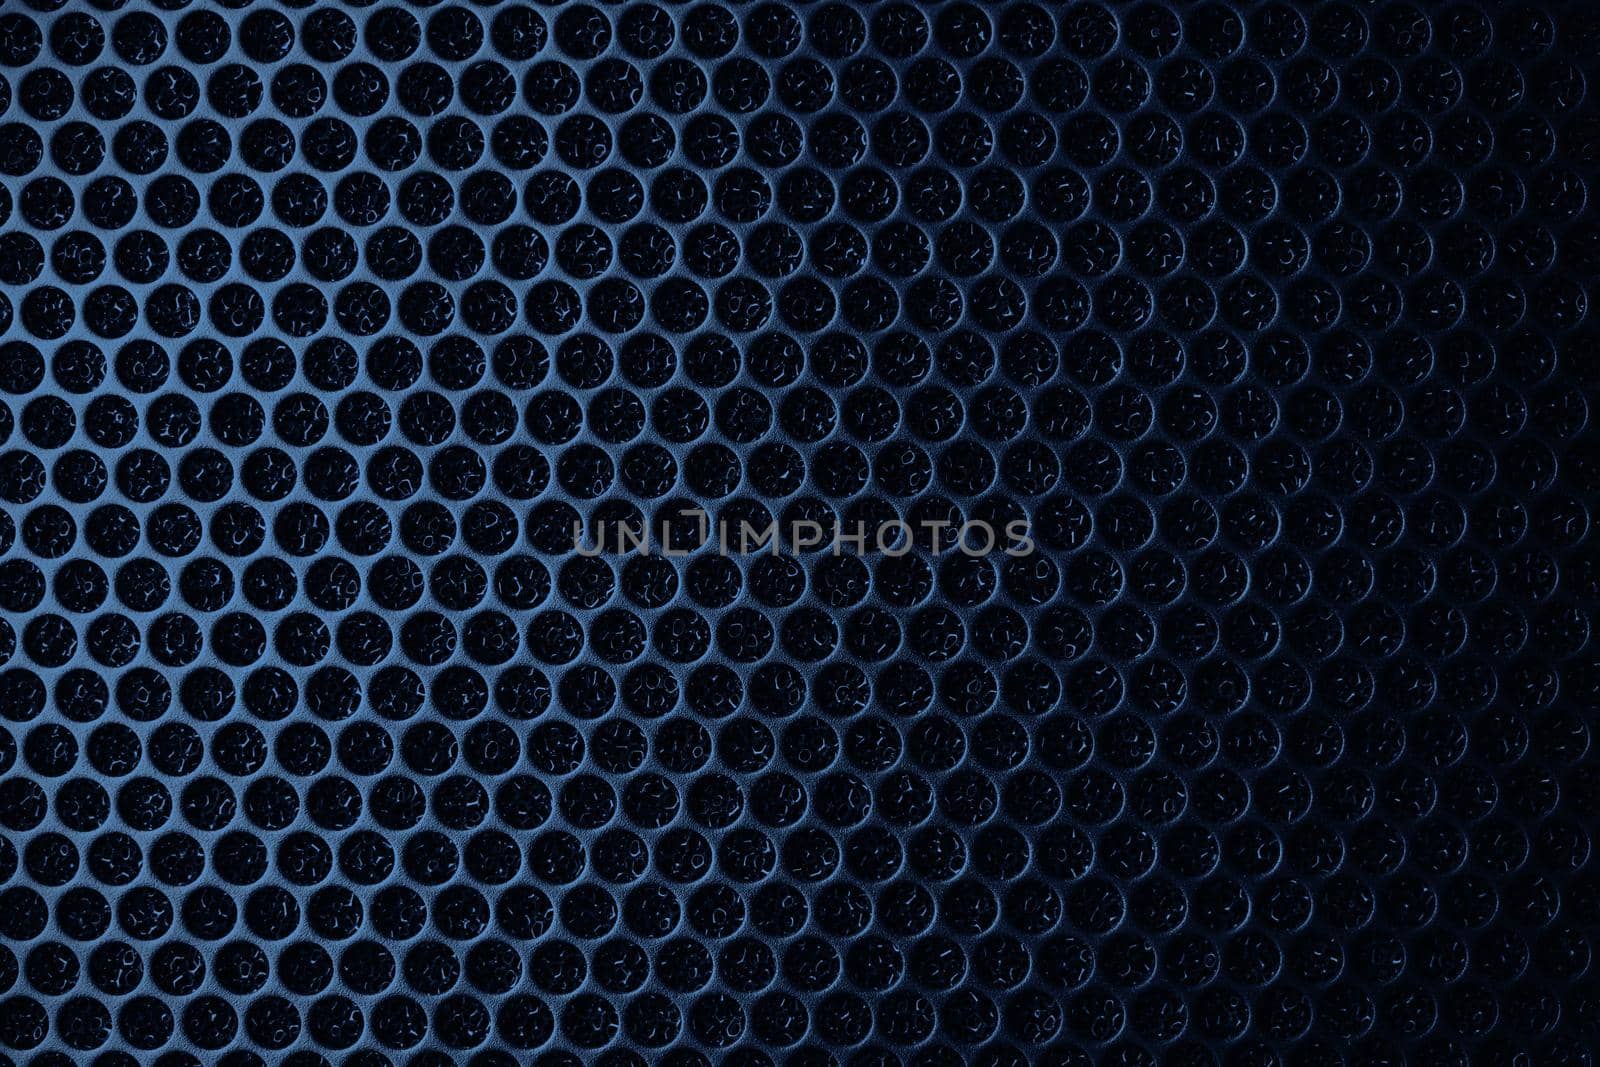 Safety net on the music speaker. Protective grid audio speakers. Close view of Black safety net. Metal perforated mesh, abstract pattern, Abstract black background. Professional audio equipment by EvgeniyQW